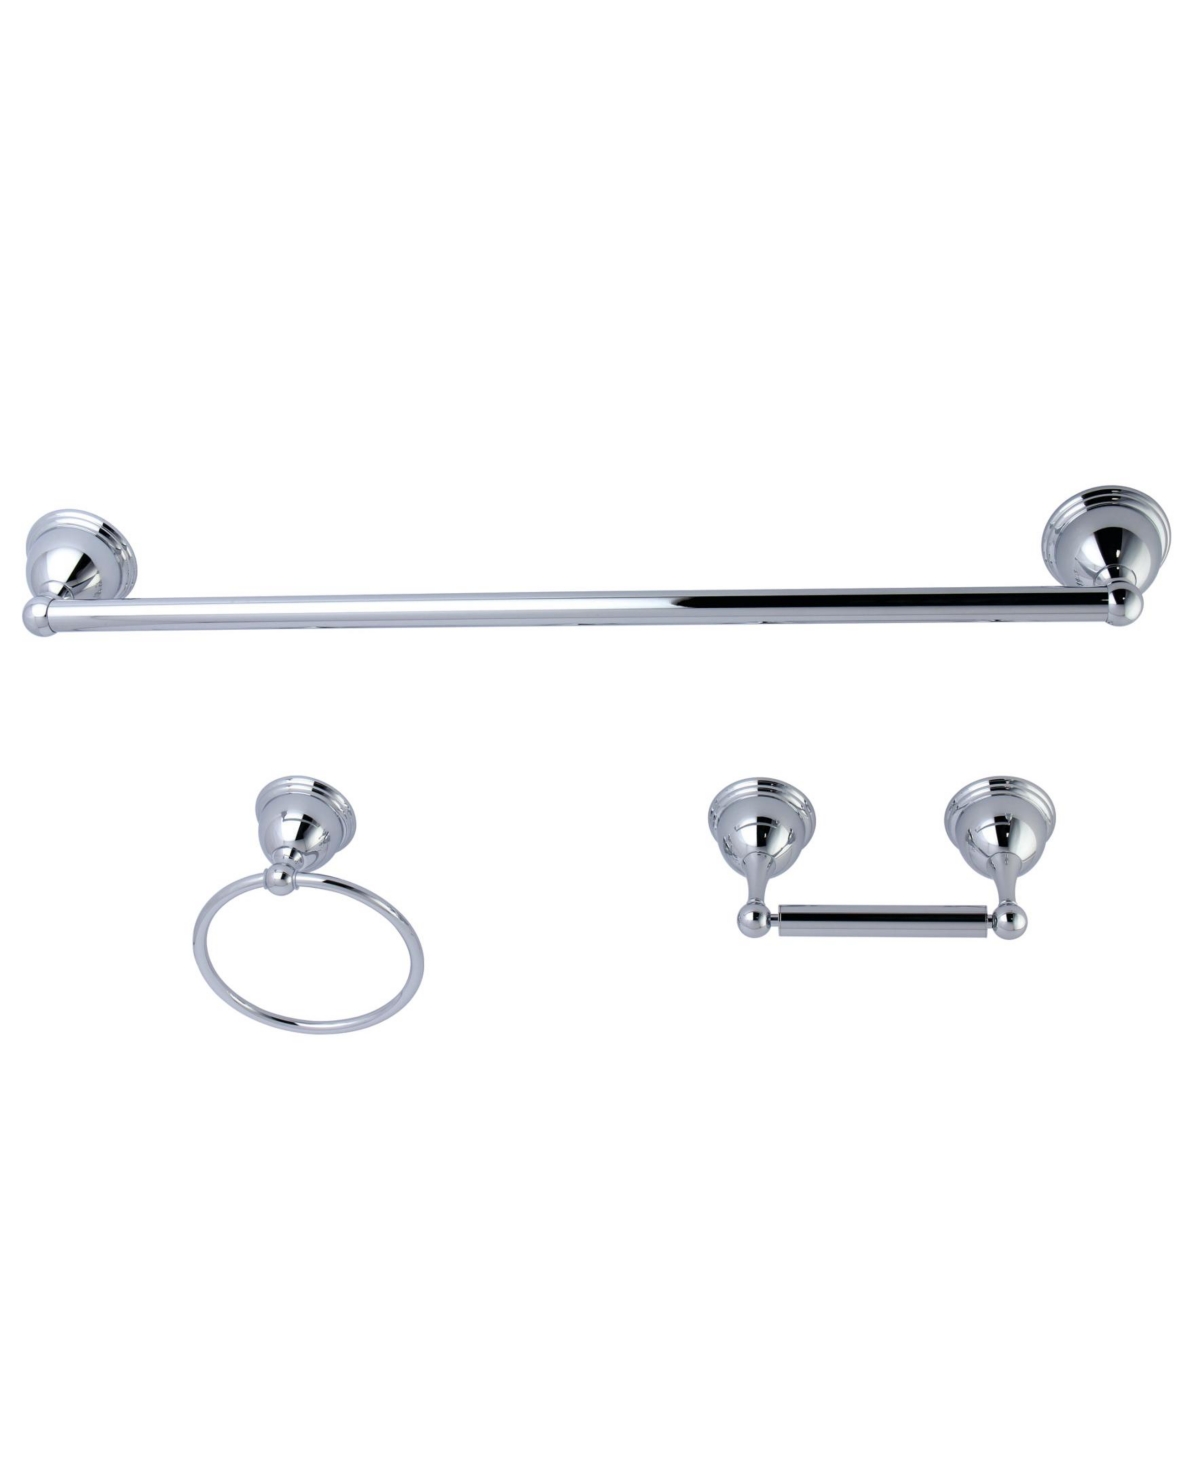 Kingston Brass Restoration 3-Pc. Bathroom Accessory Combo in Polished Chrome Bedding